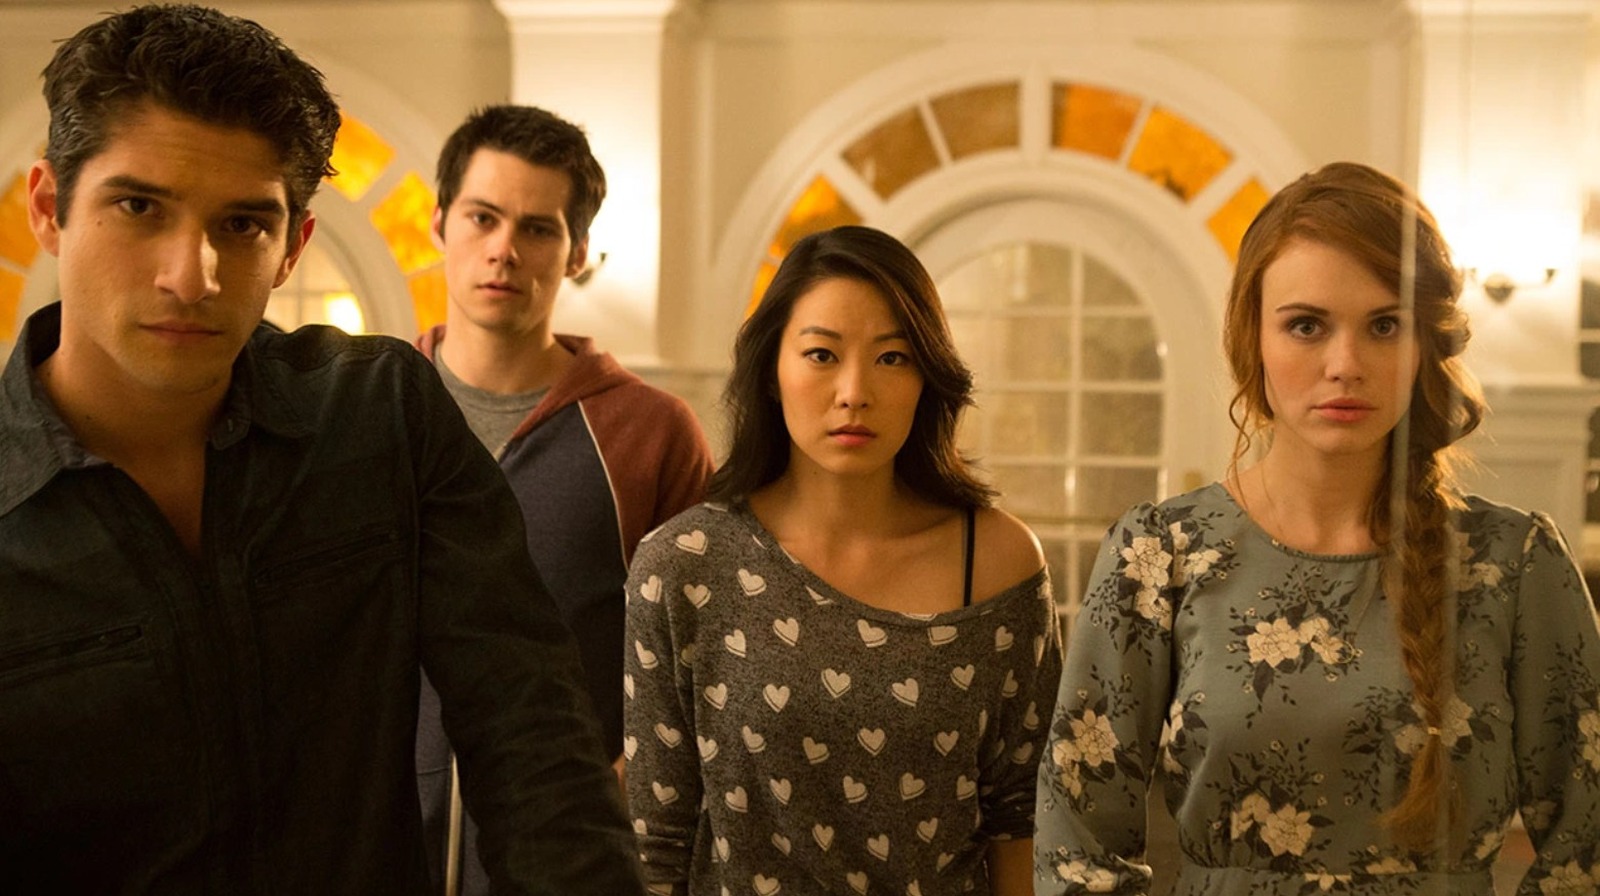 #Arden Cho Turned Down The Teen Wolf Movie After Being Offered Less Than Half The Salary Of Her Other Co-Stars